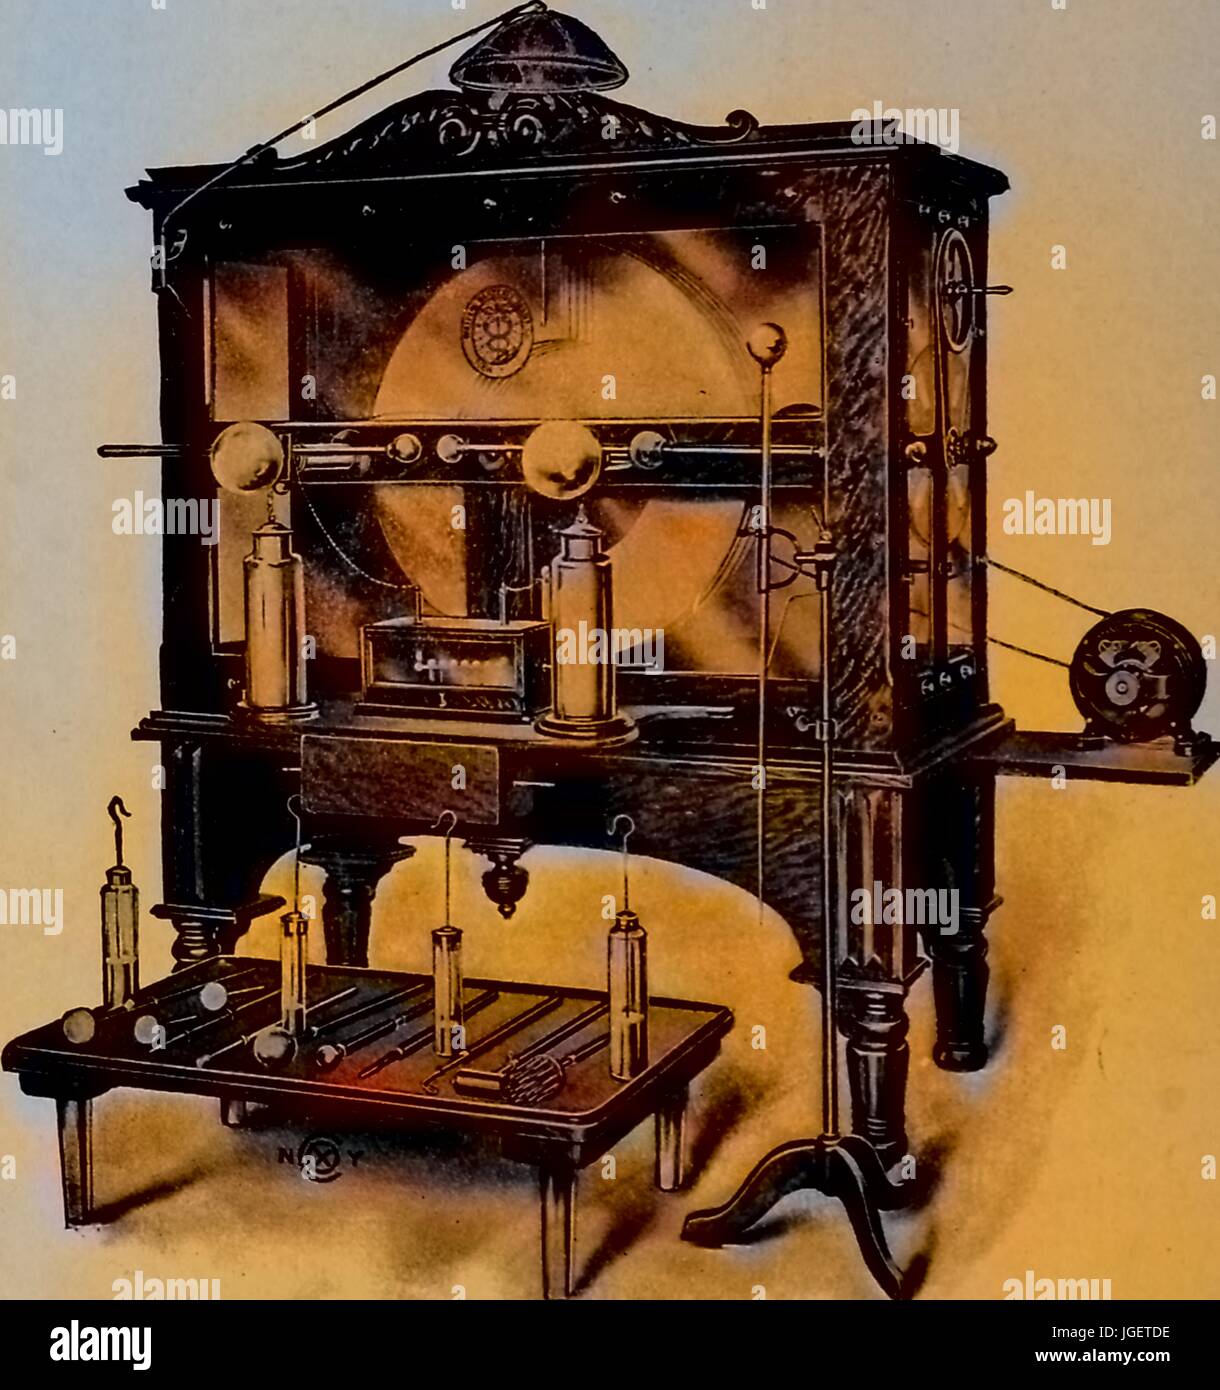 Illustration of then state-of-the-art dental radiography equipment, which used static electricity to power an X Ray system, produced by Waite and Bartlett and enclosed in an ornate wooden cabinet, New York, 1913. Note: Image has been digitally colorized using a modern process. Colors may not be period-accurate. Stock Photo